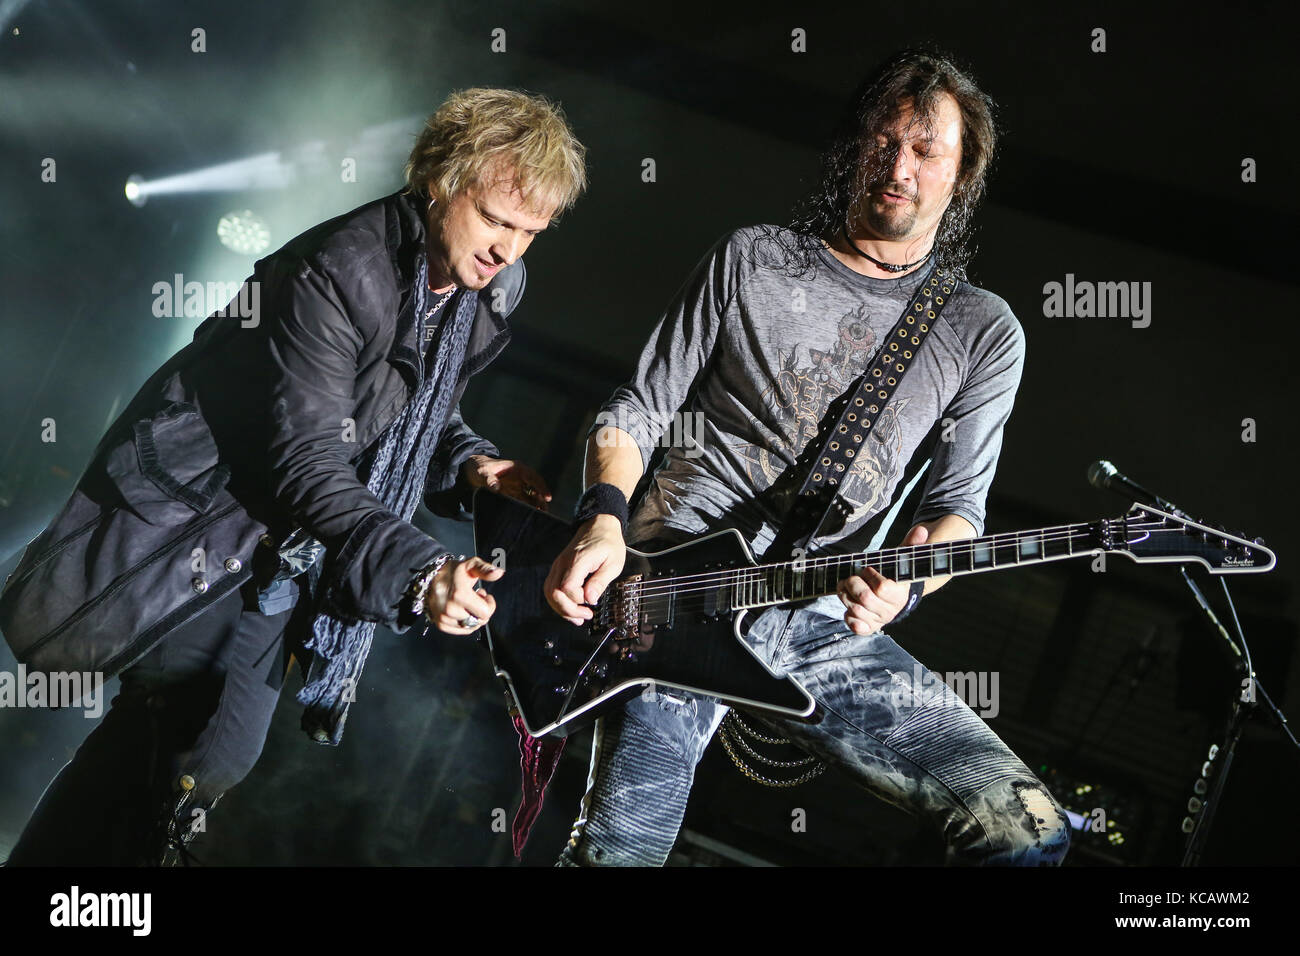 Wartenberg, Germany. 3rd October, 2017. Edguy, German Power Metal Band around singer Tobias Sammet. Final concert of their '25 Years - The Best of the Best Monuments 2017'-Tour at Wartenberg-Oval, Wartenberg-Angersbach, Germany. Here Tobias Sammet (L) and Jens Ludwig (R, guitar). Credit: Christian Lademann Stock Photo